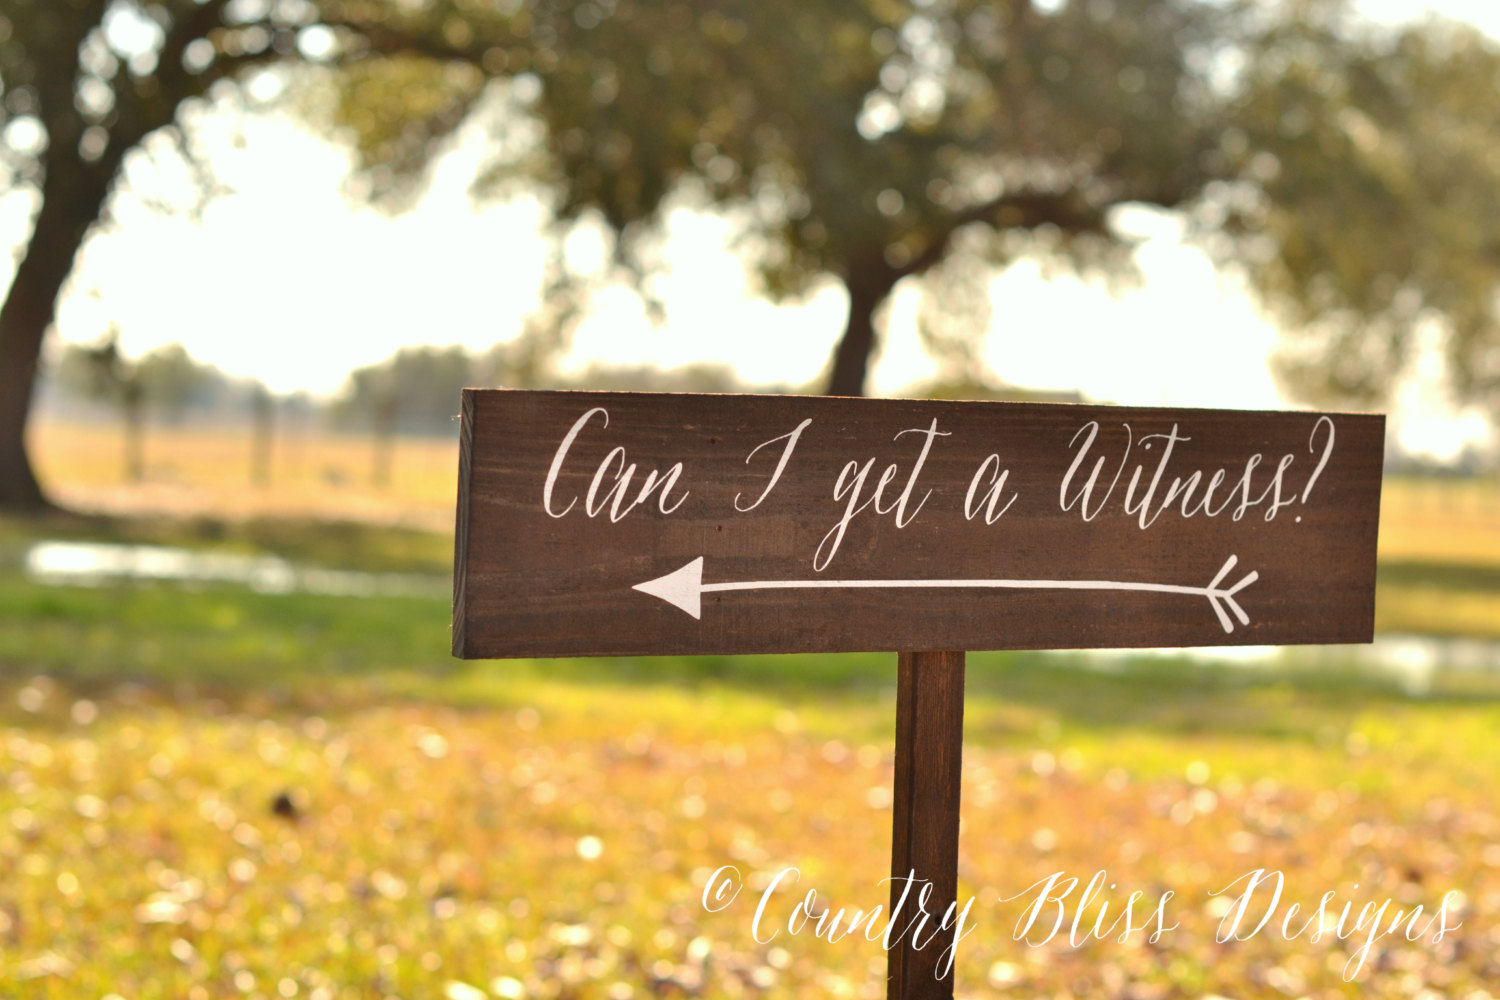 can i get a witness wedding sign by country bliss designs | signs entrance weddings | https://emmalinebride.com/decor/signs-entrance-weddings/